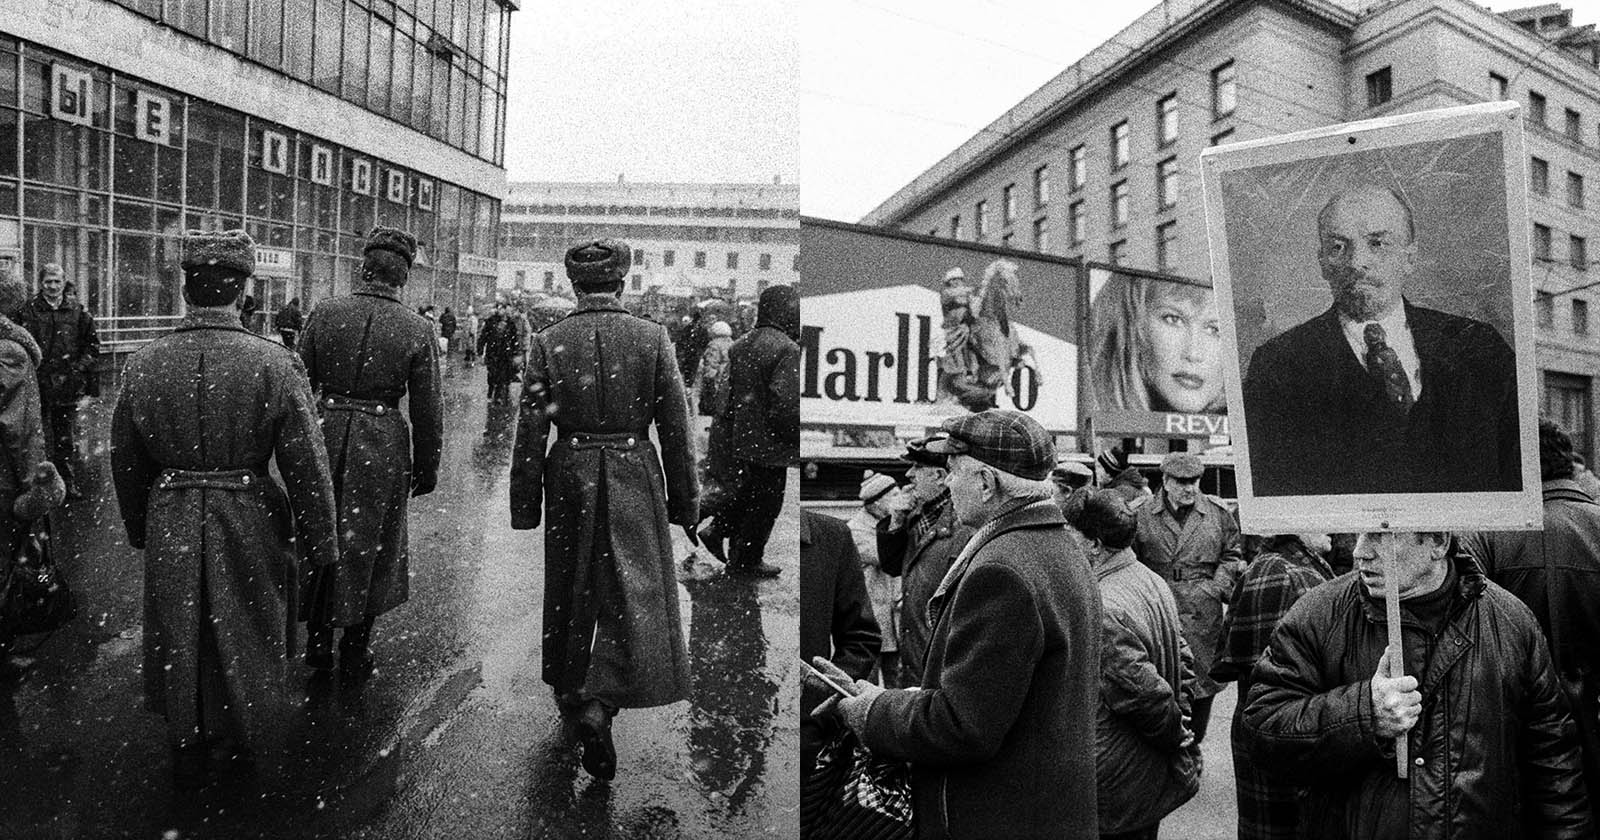 Lost Film Rolls of the Fall of the Soviet Union Developed 26 Years Later | PetaPixel